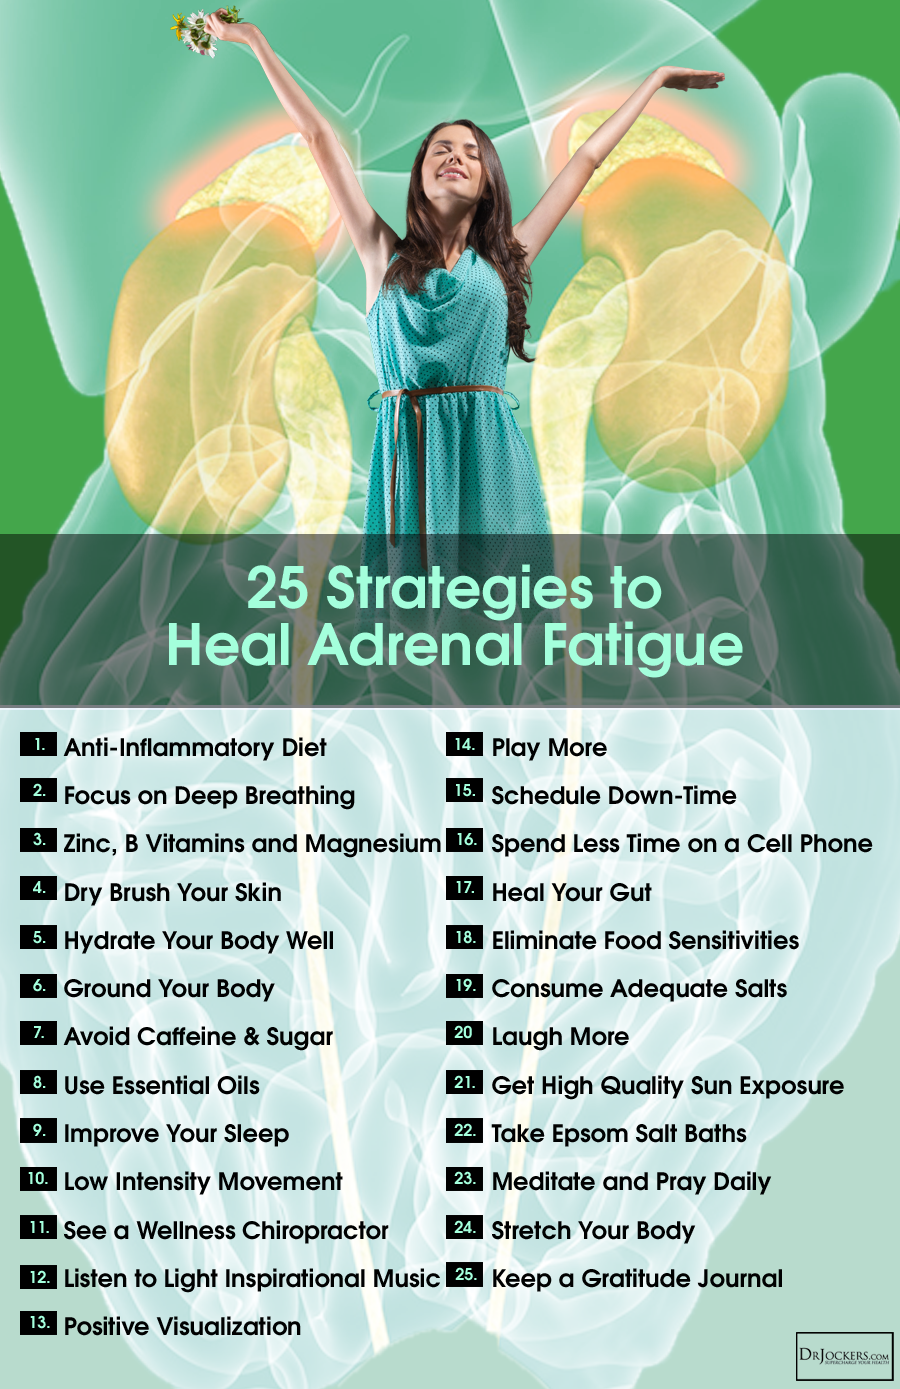 25 Lifestyle Strategies to Heal Adrenal Fatigue